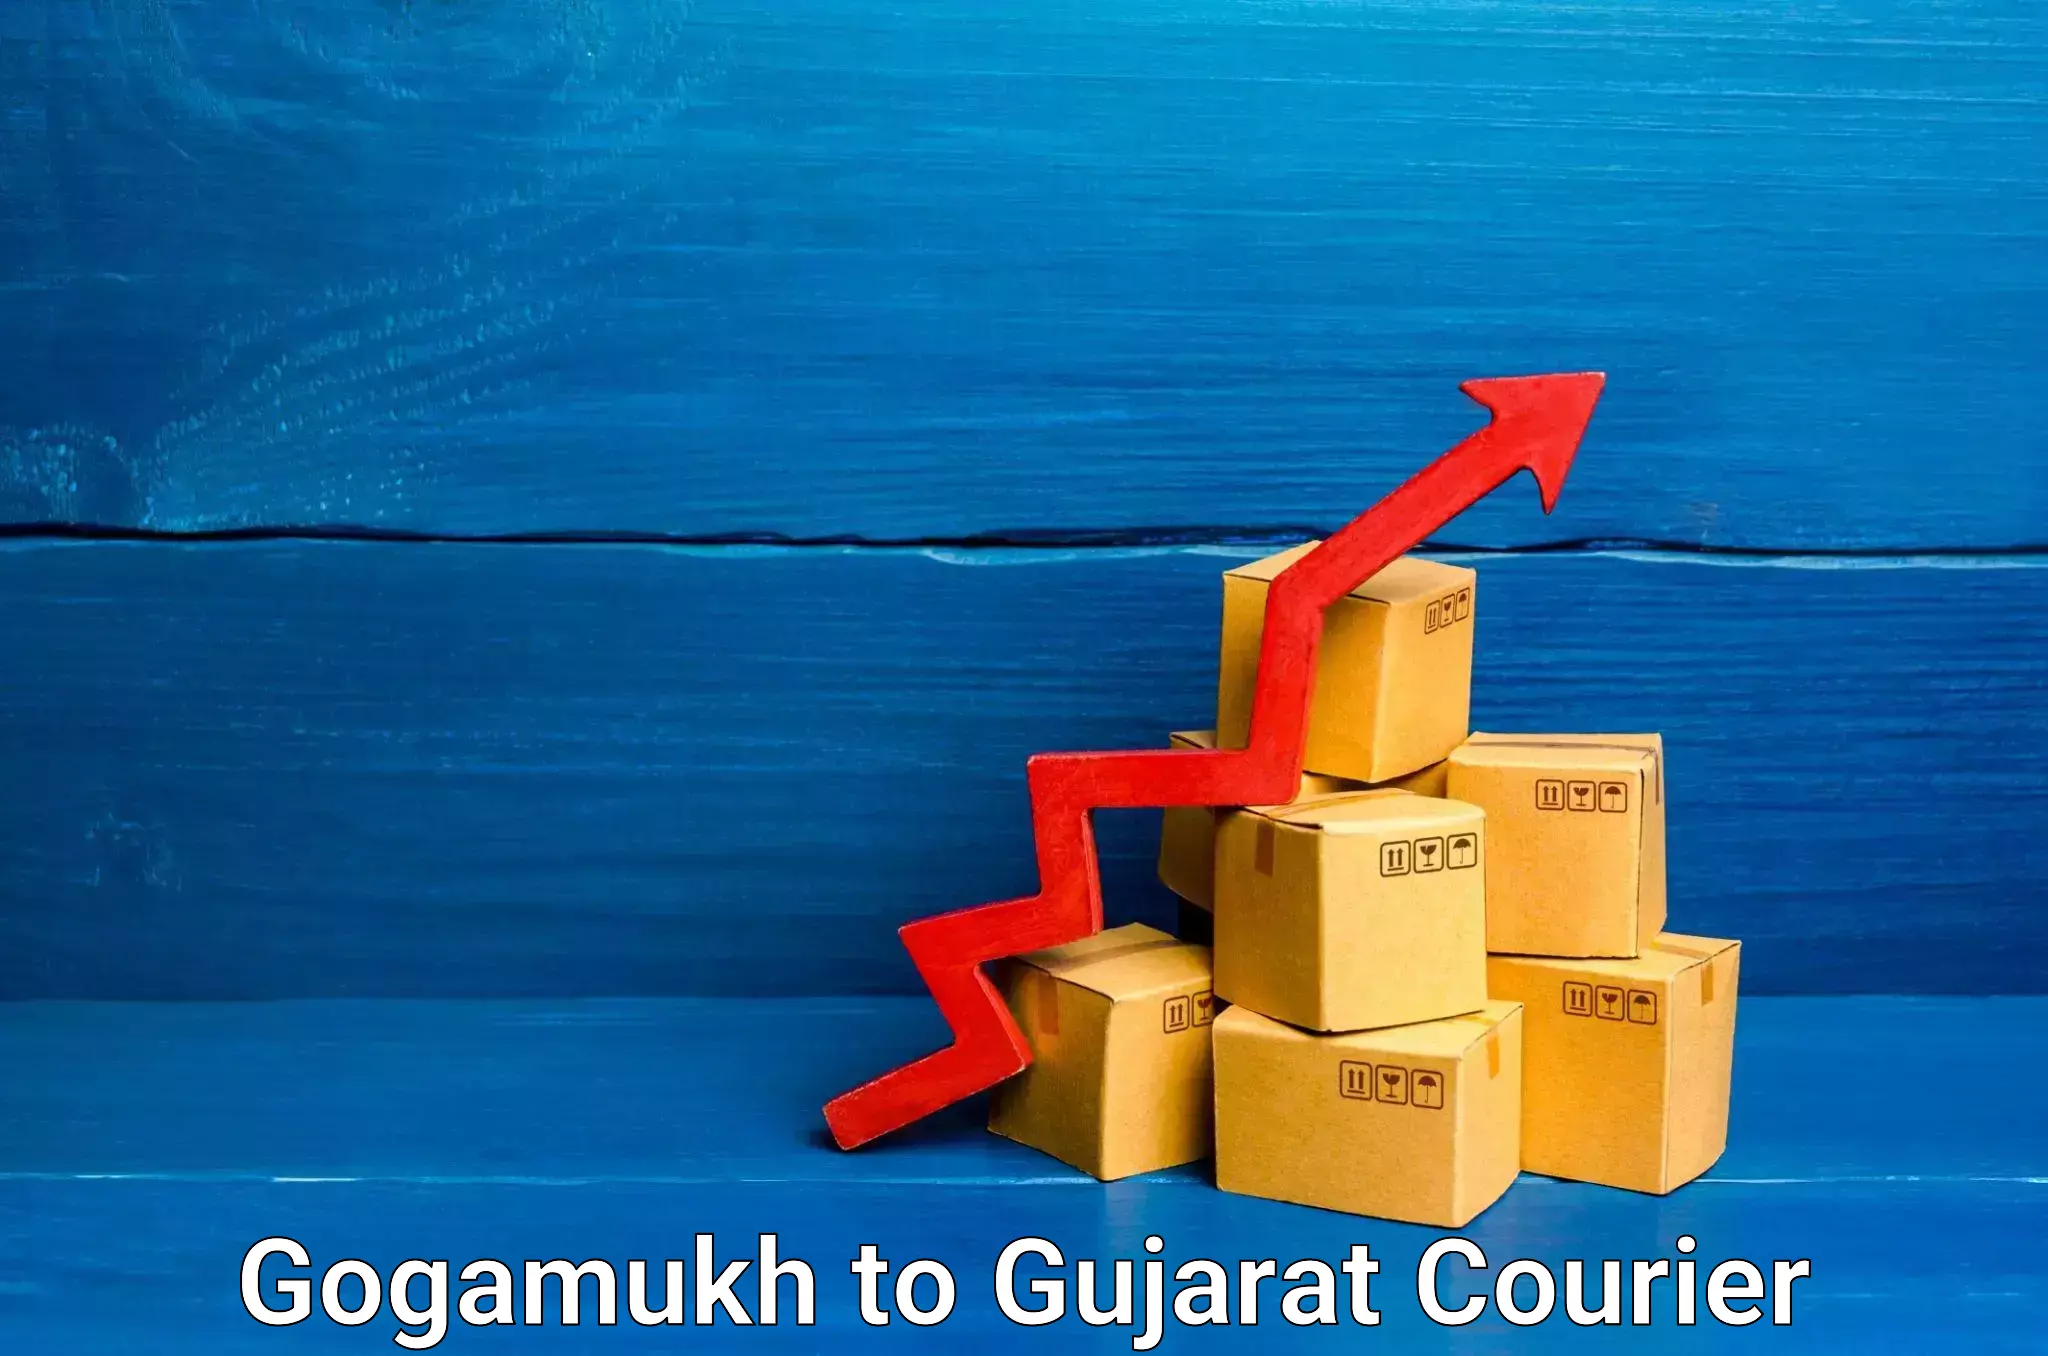 Sustainable delivery practices Gogamukh to Gujarat